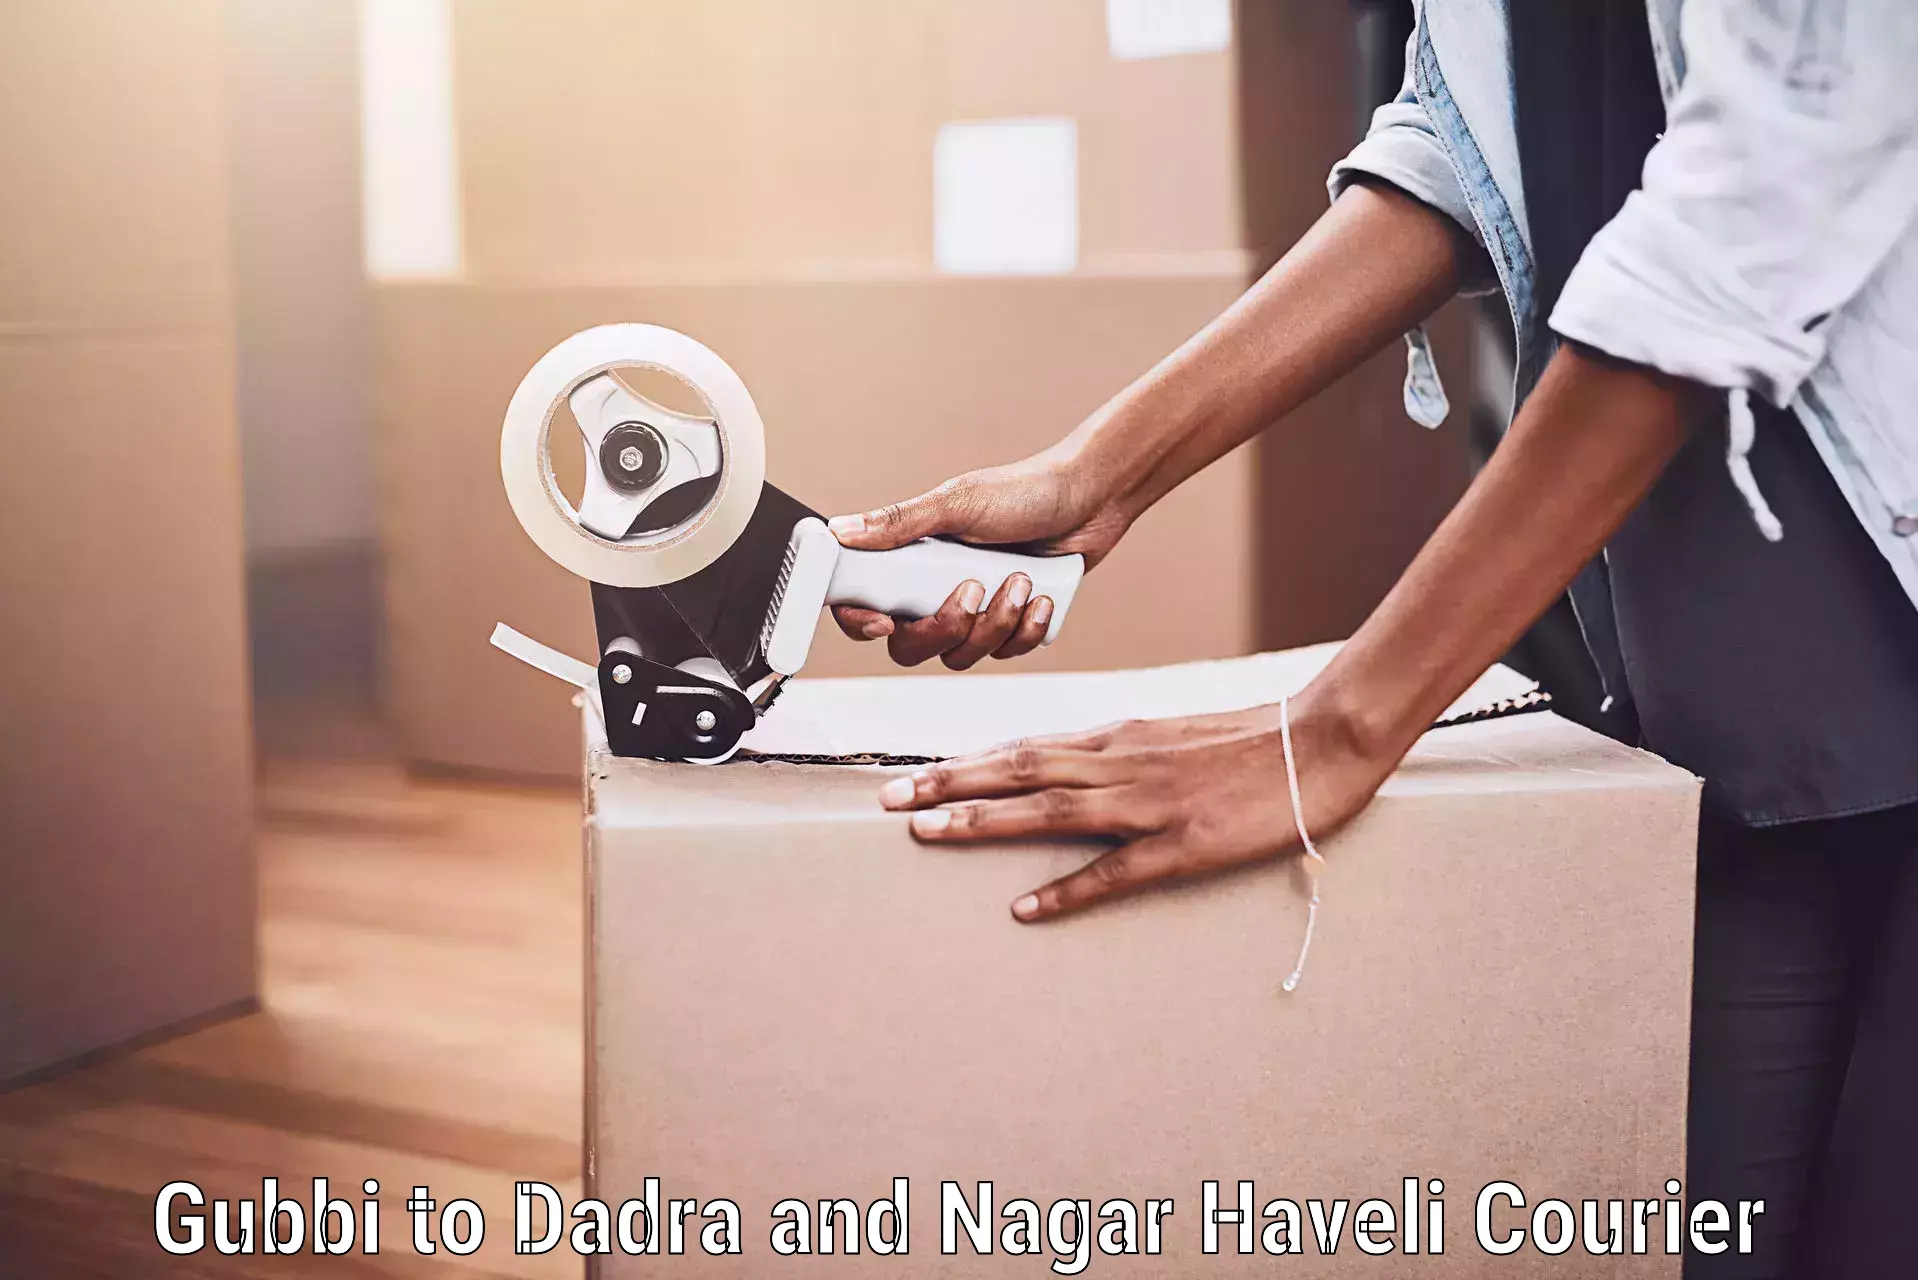 Instant baggage transport quote Gubbi to Dadra and Nagar Haveli